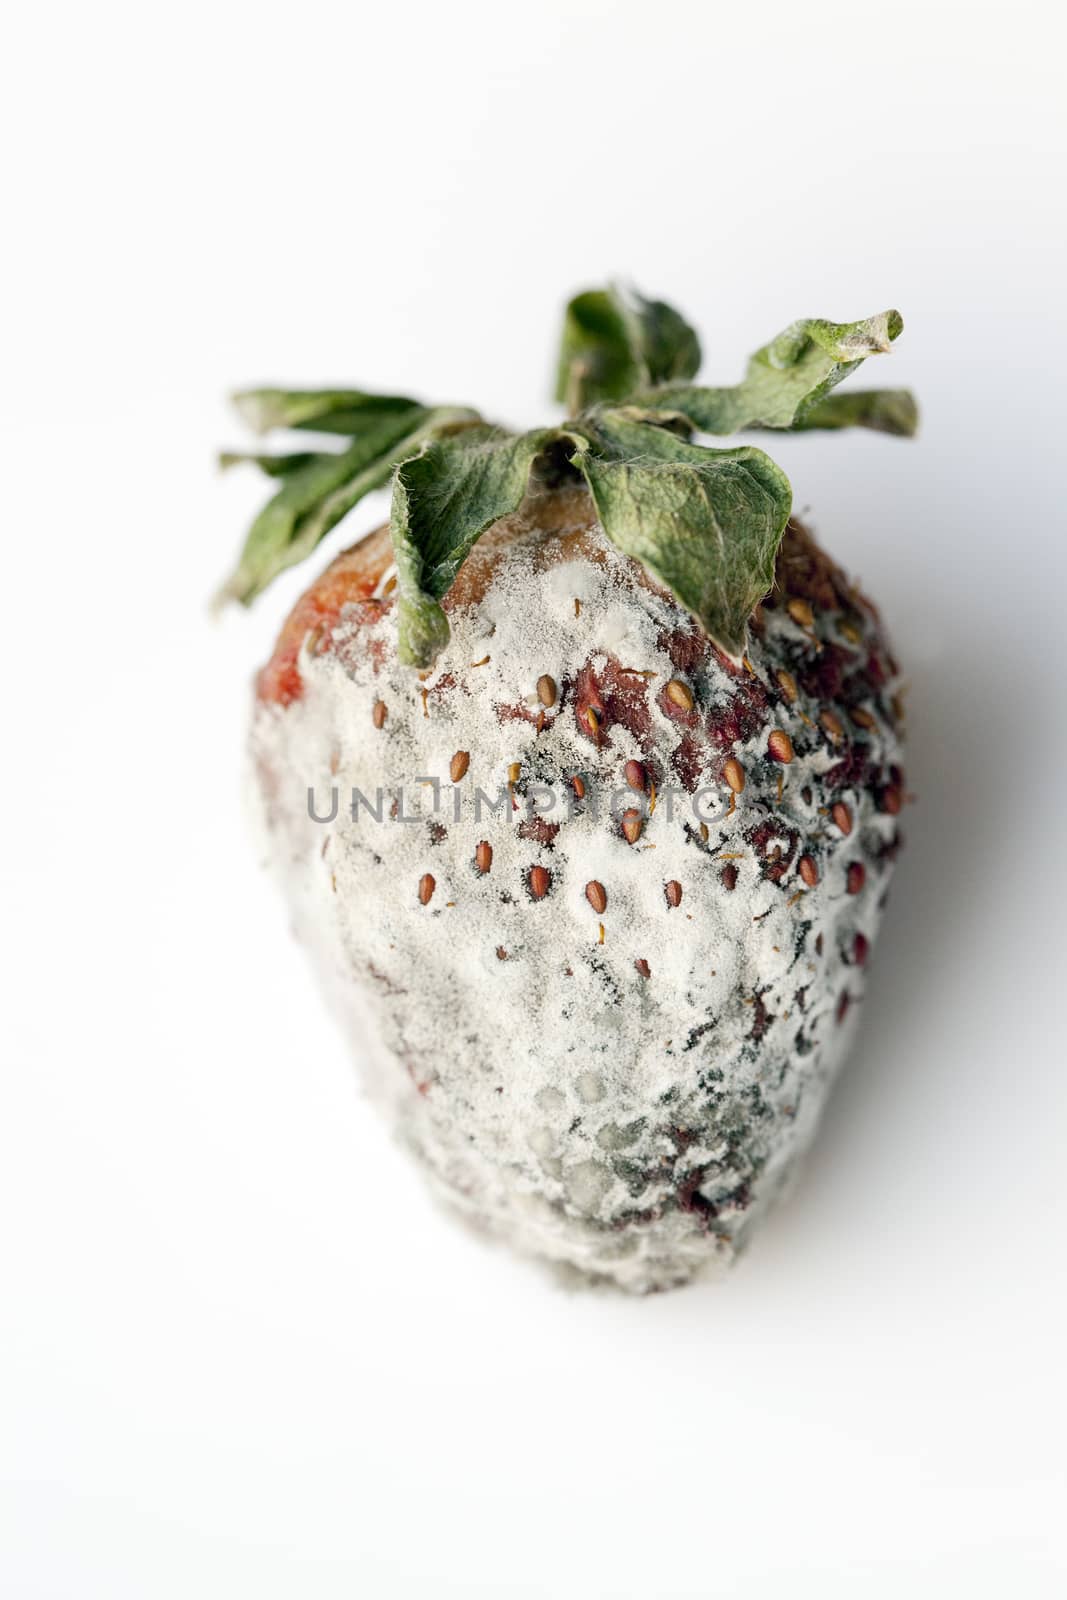 photographed red ripe strawberries, covered with white mold, spoiled strawberries closeup